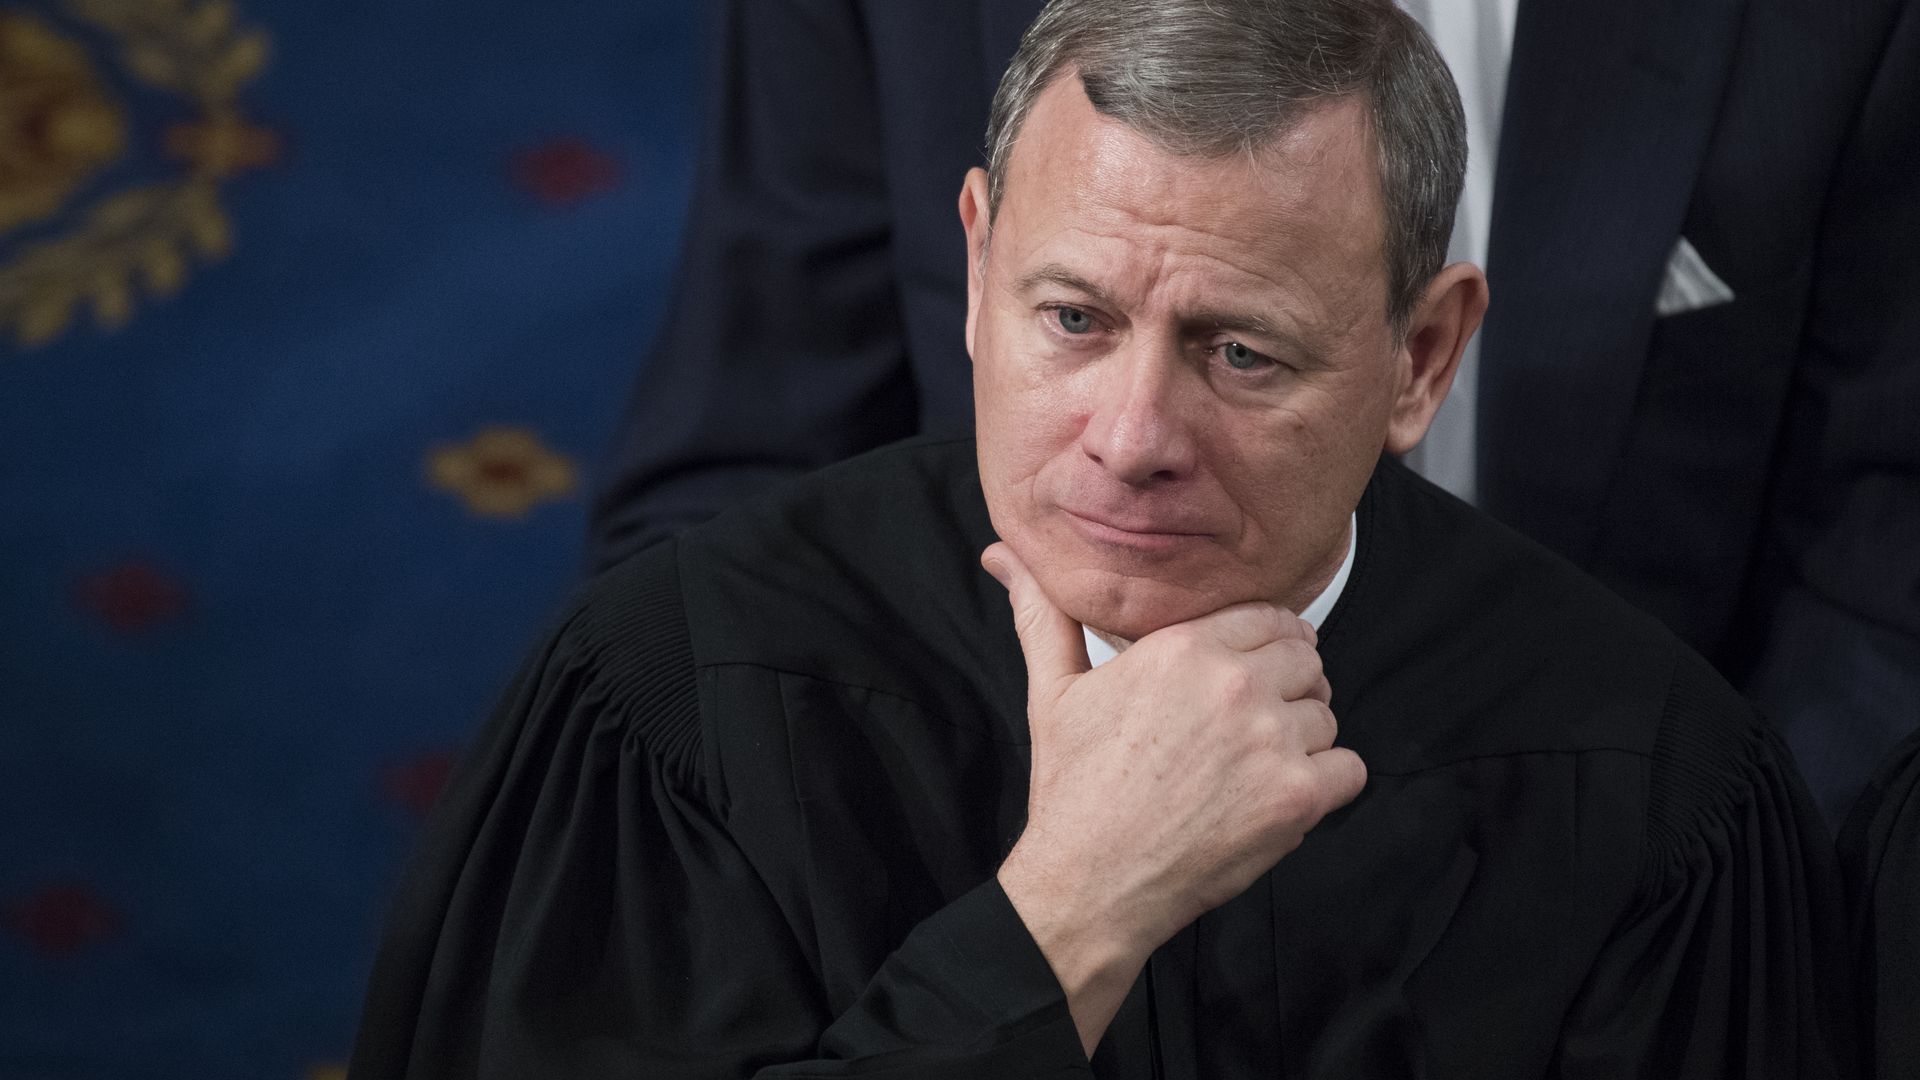 Supreme Court Chief Justice John Roberts listens to President Donald Trump's State of the Union address to a joint session of Congress on January 30